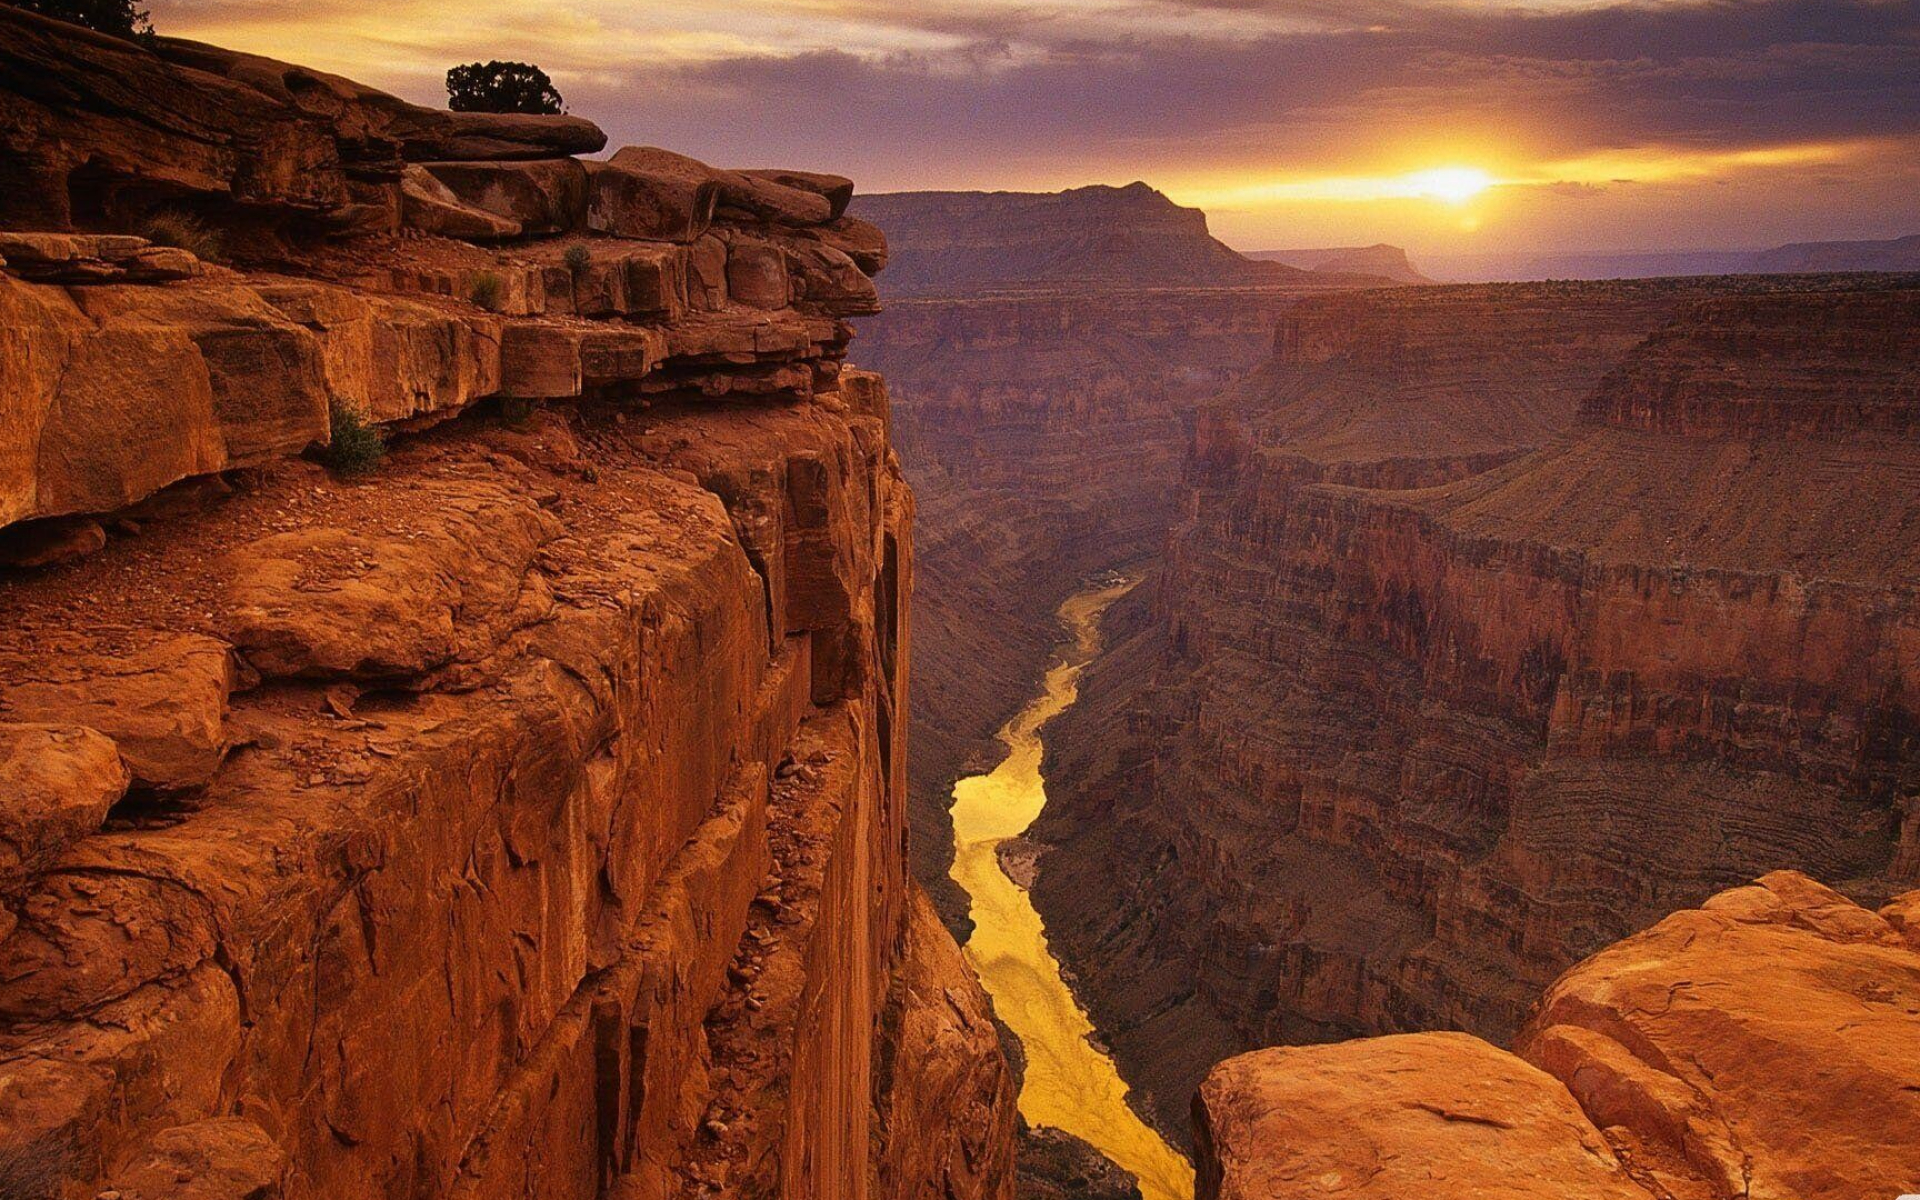 Grand Canyon: Erosion, The Colorado River, A deep channel cut through layers of rock. 1920x1200 HD Wallpaper.